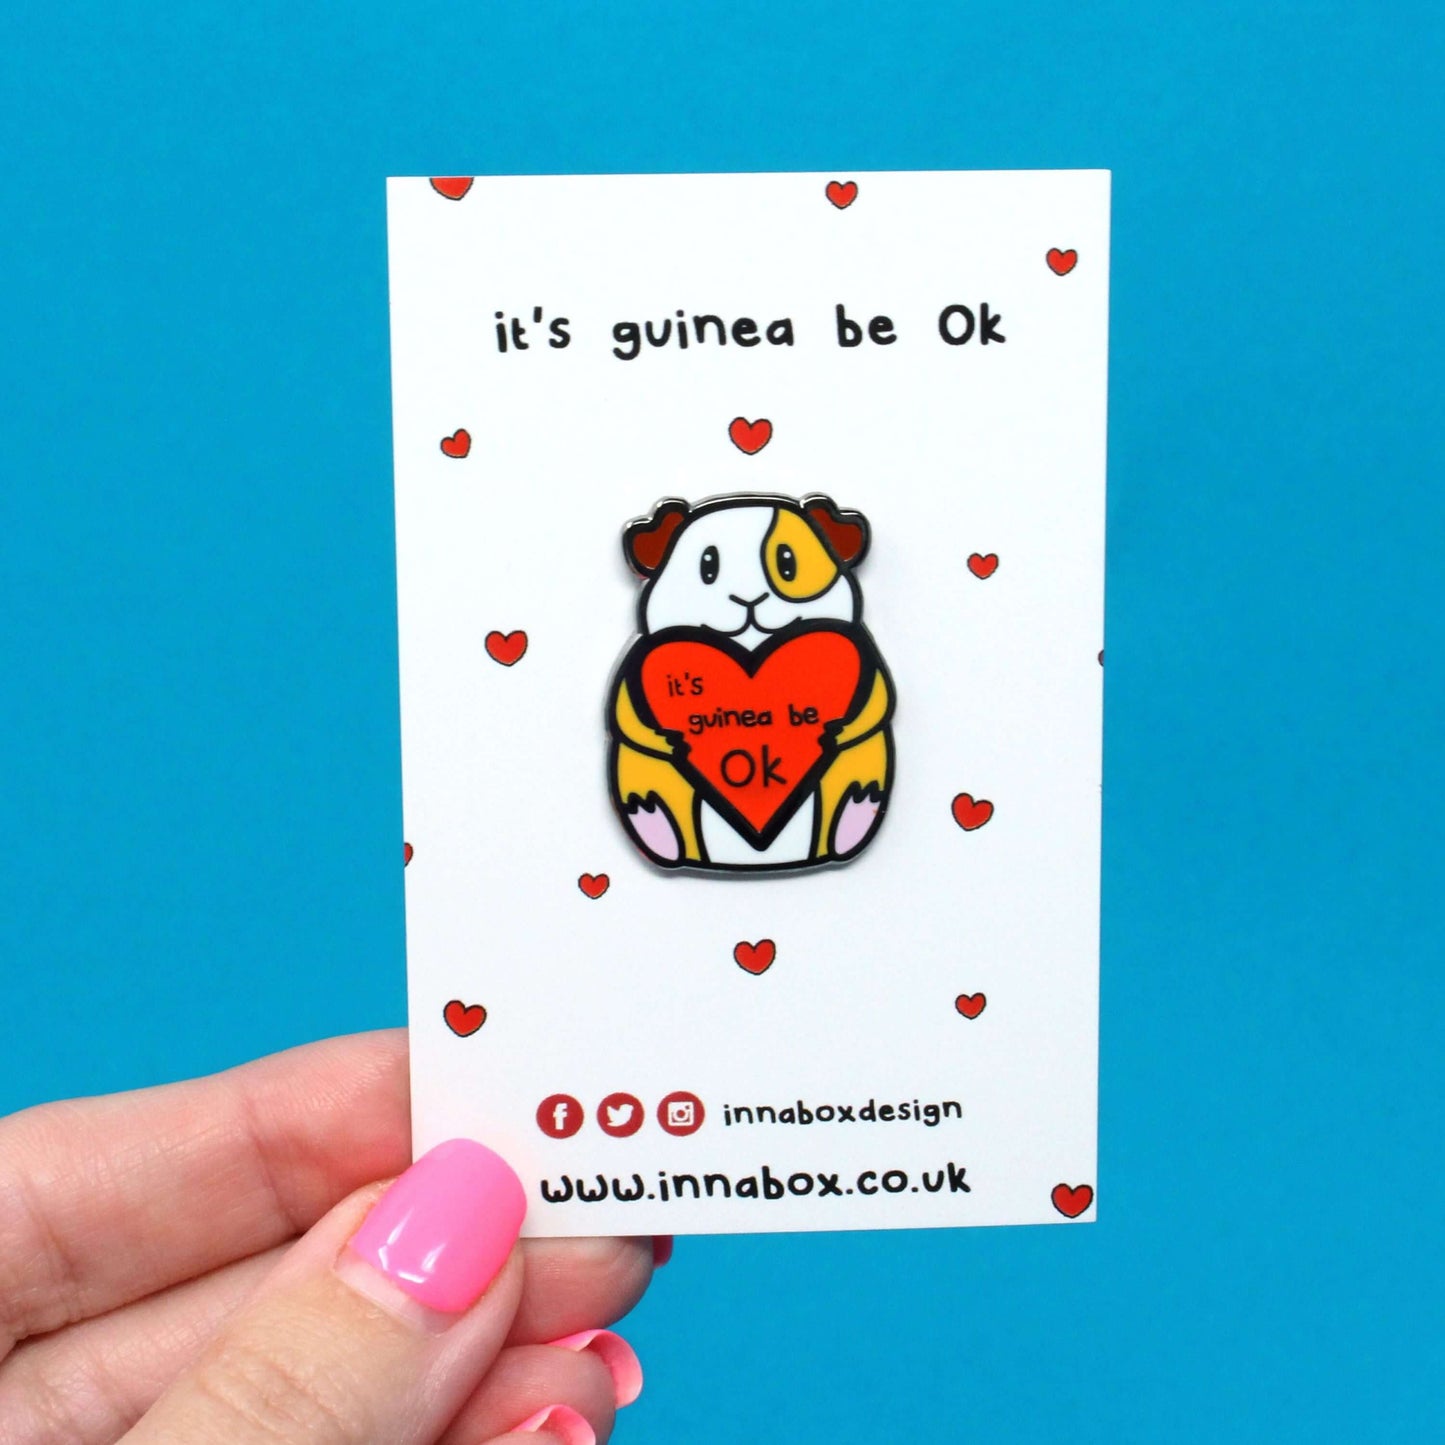 Guinea Pig Mental Health Enamel Pin on white backing card with red hearts held in front of a  blue background. The enamel pin is of a smiling guinea pig holding a big red heart with the text it's guinea be ok inside. The enamel pin is deigned to raise awareness for mental health.